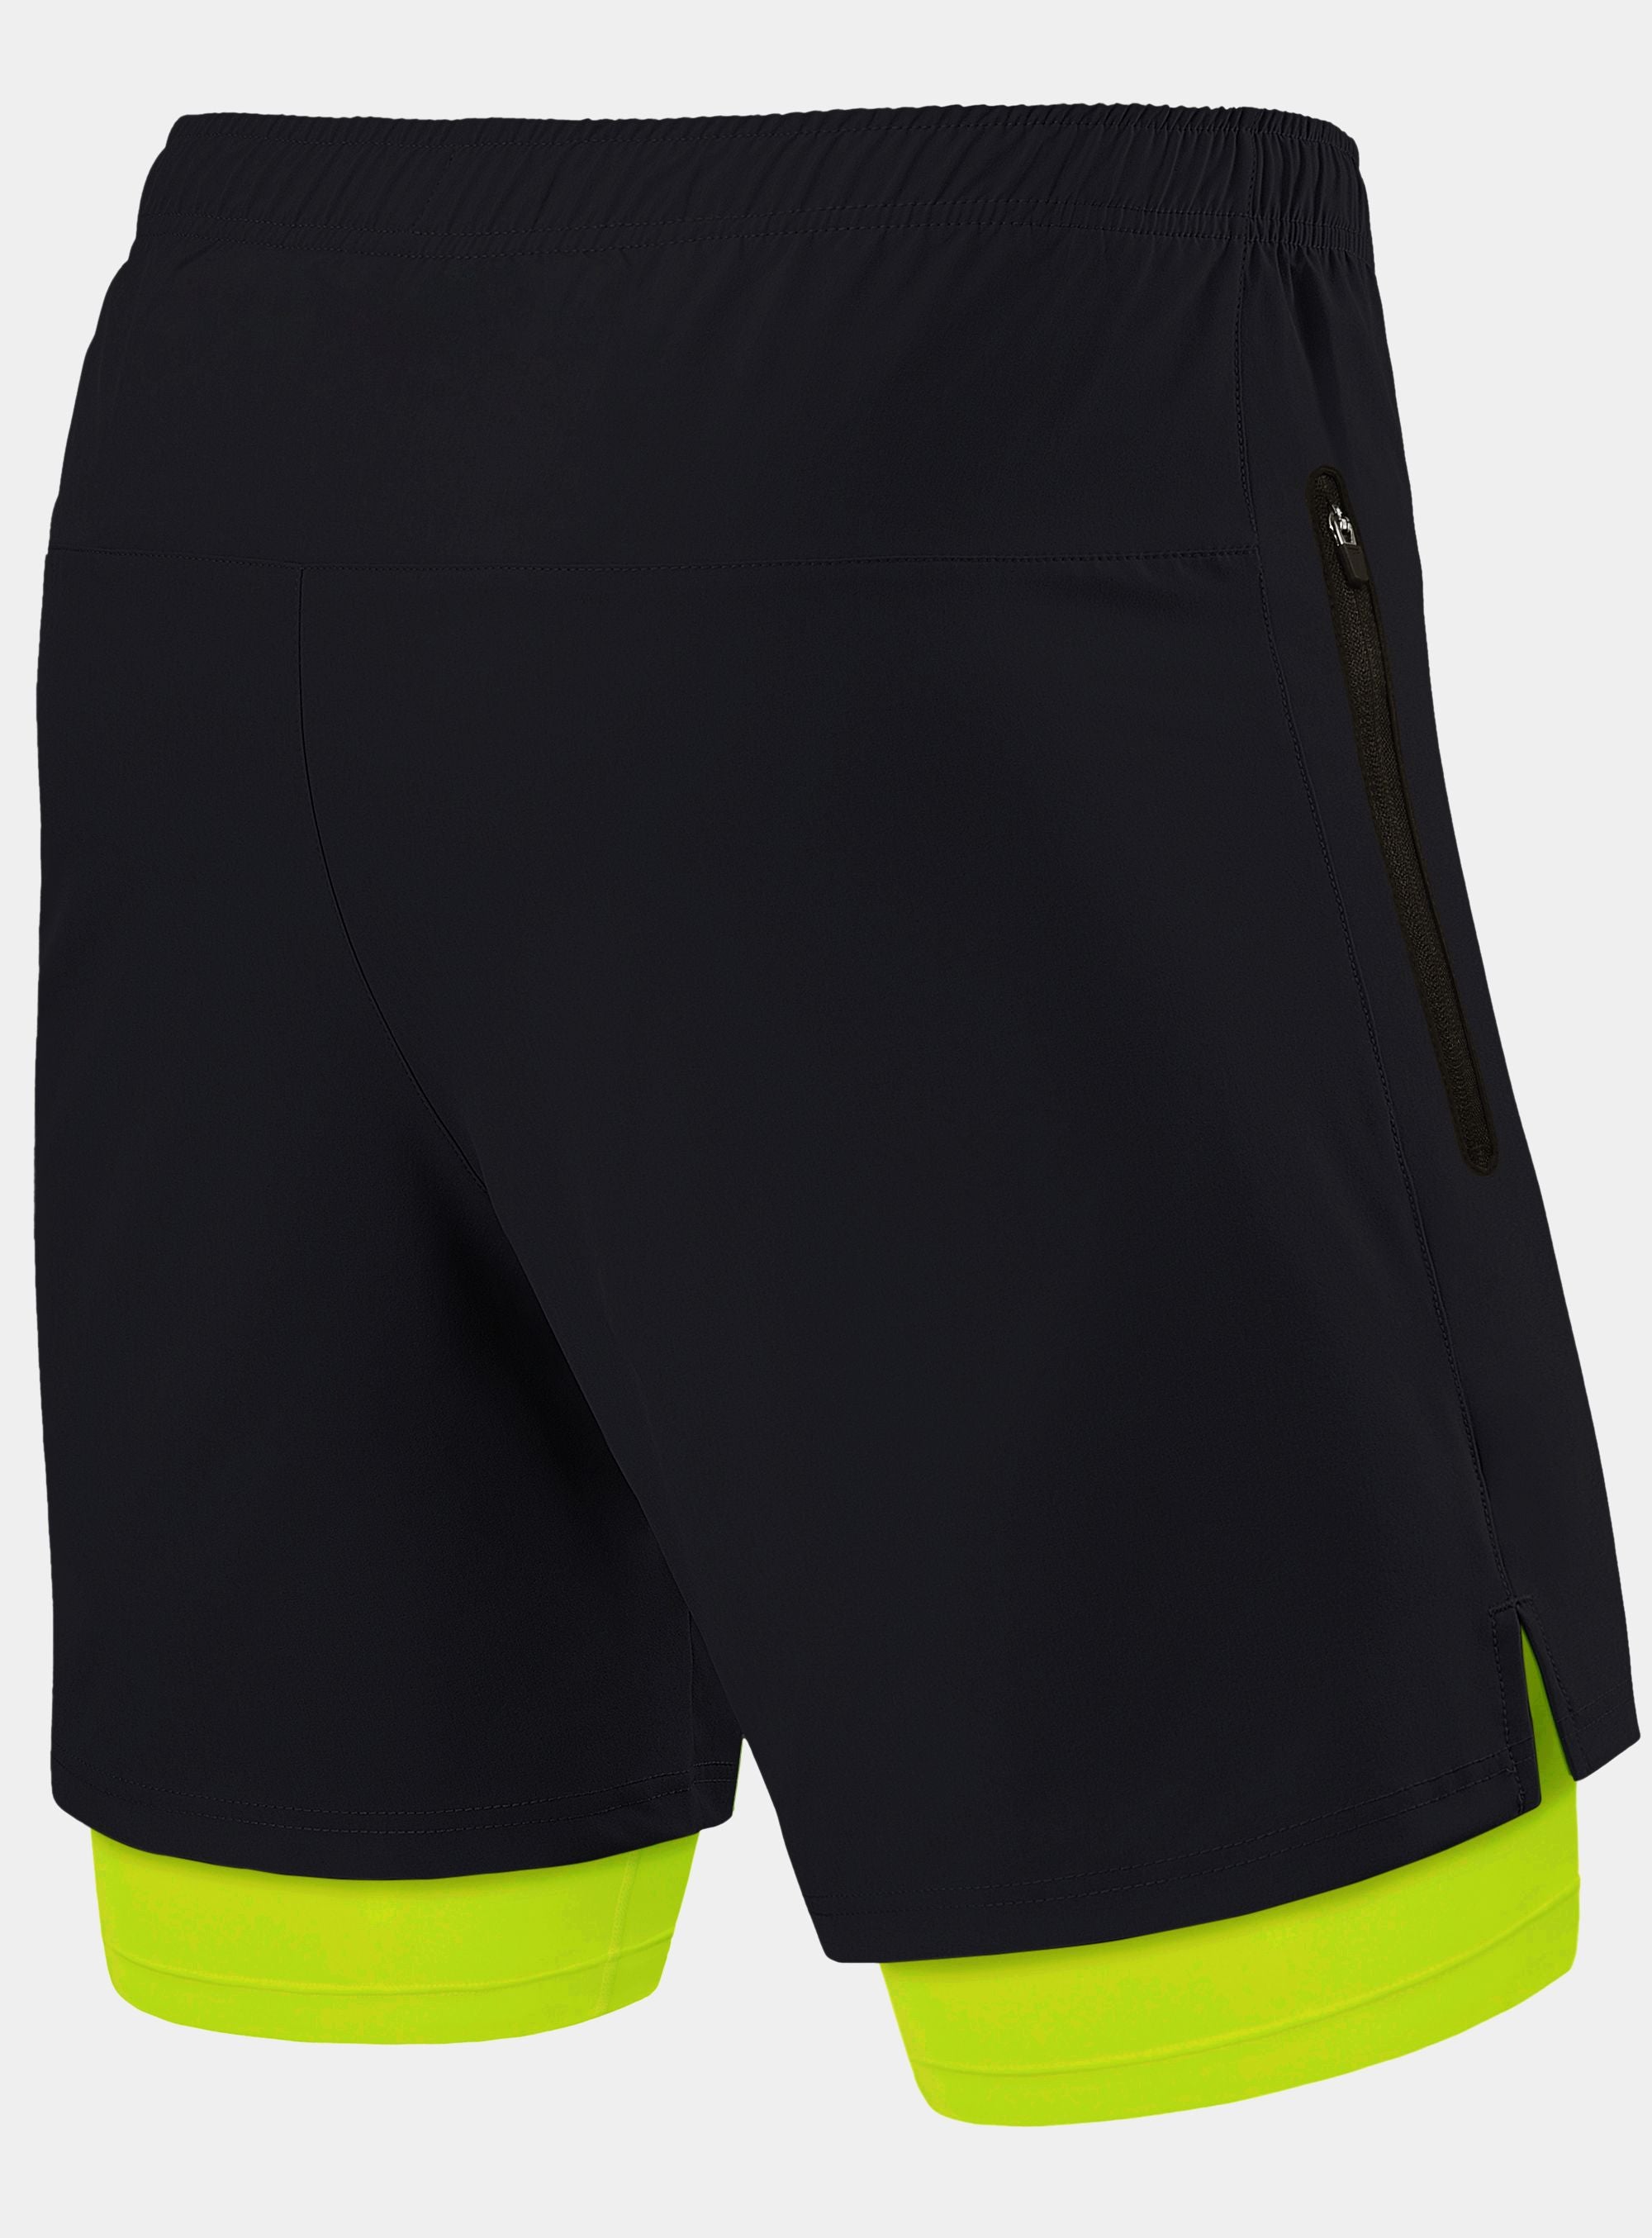 Black Running Shorts With Inner compression shorts For Men